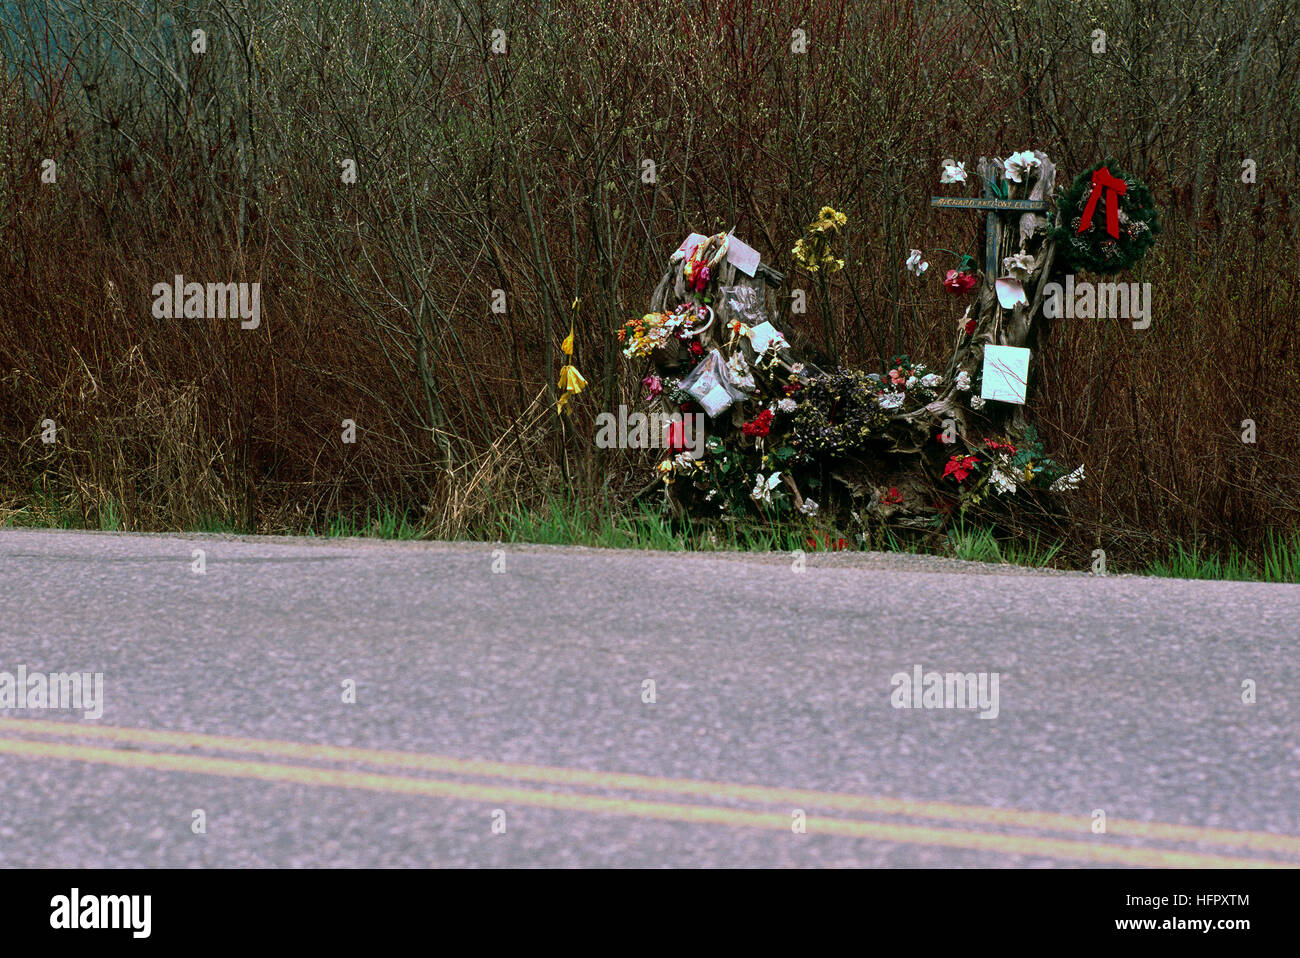 Roadside Memorial Shrine and Tribute for Victim killed in Fatal Car Accident Stock Photo